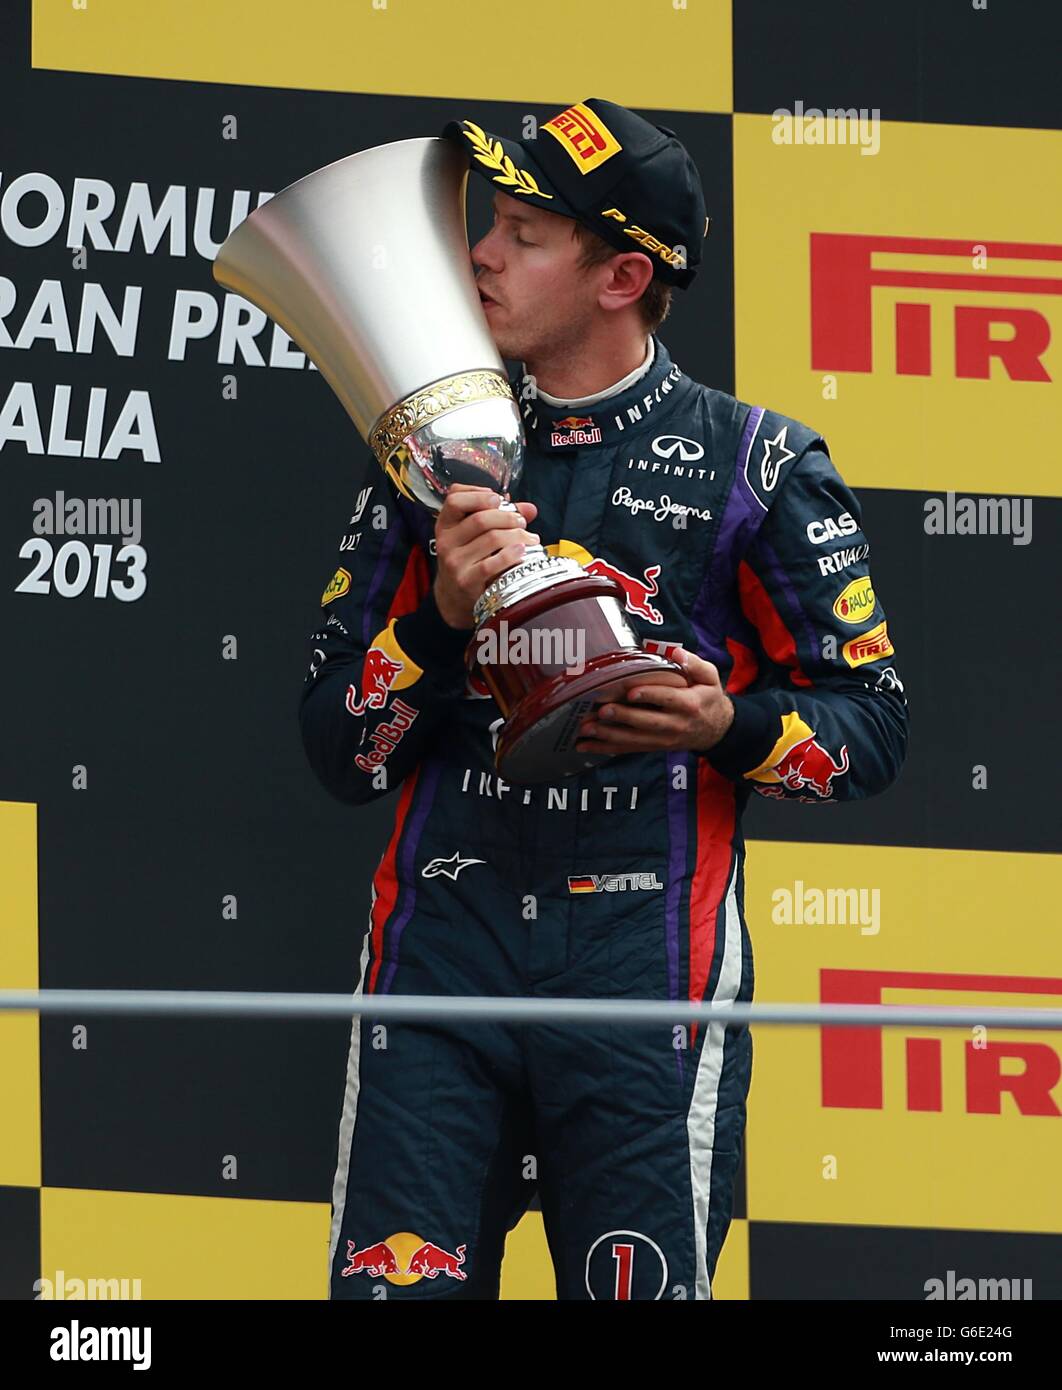 World Champion Vettel and Red Bull receive 2012 rewards in Istanbul